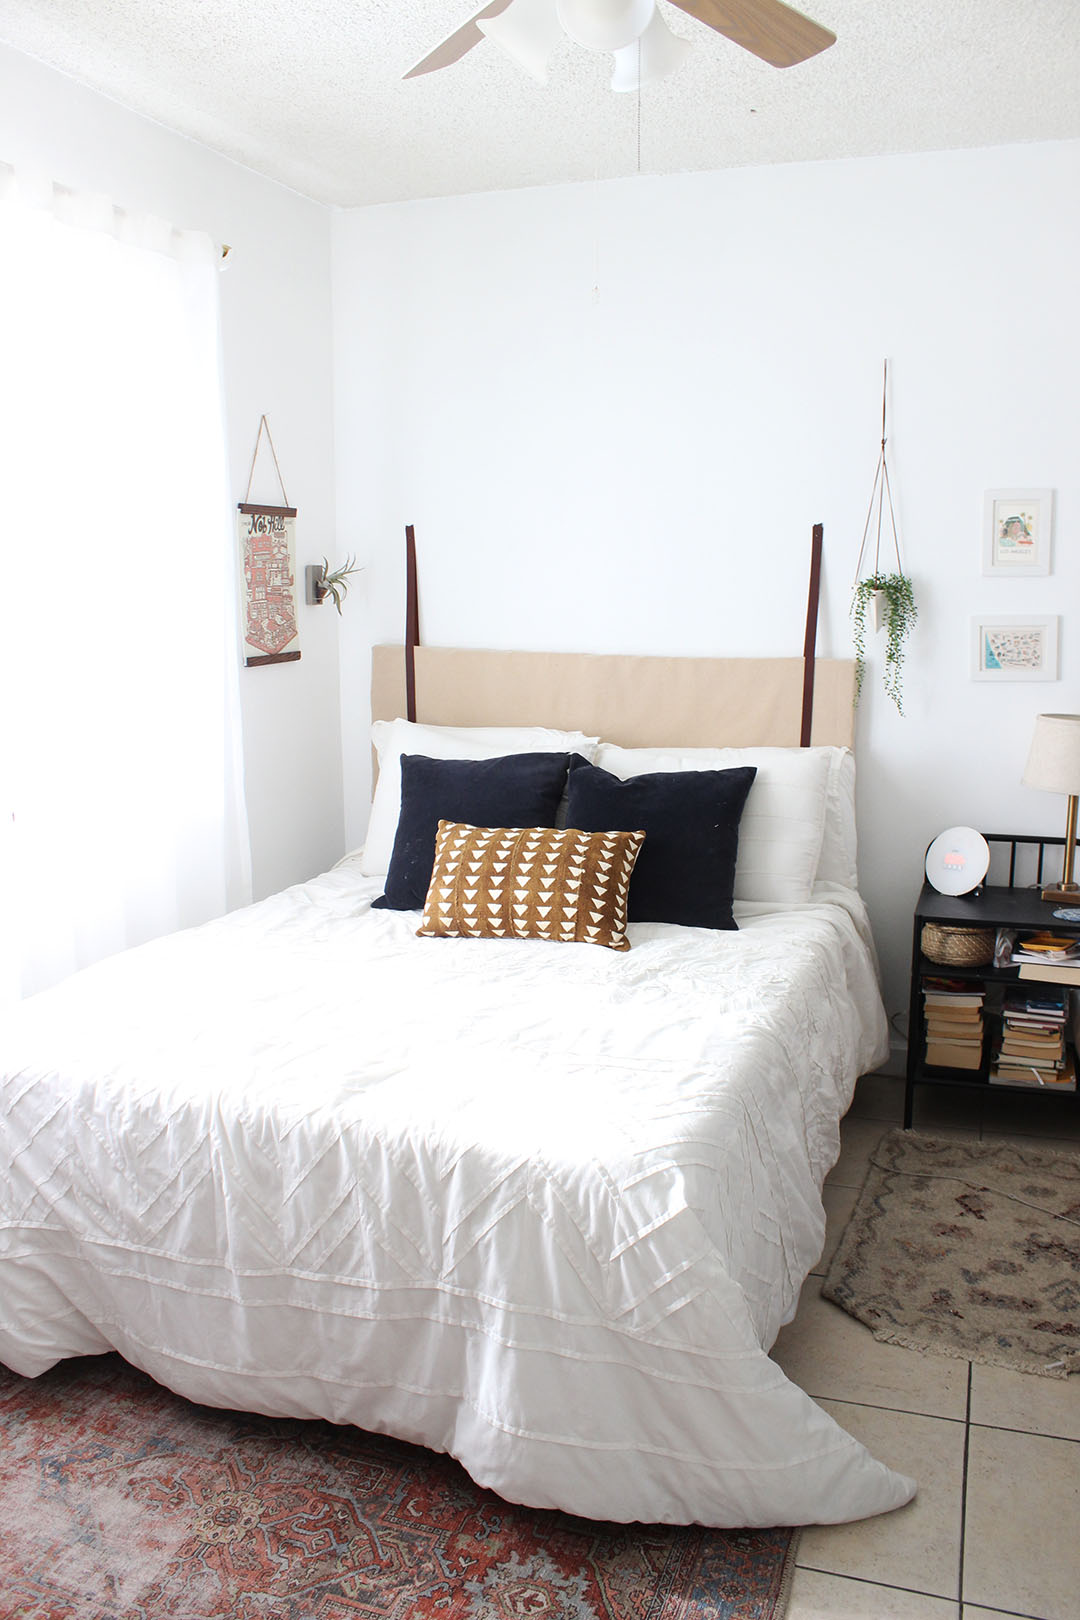 Sweet Helen Grace - A Boho Minimalist Bedroom That Mixes Old and New Decor